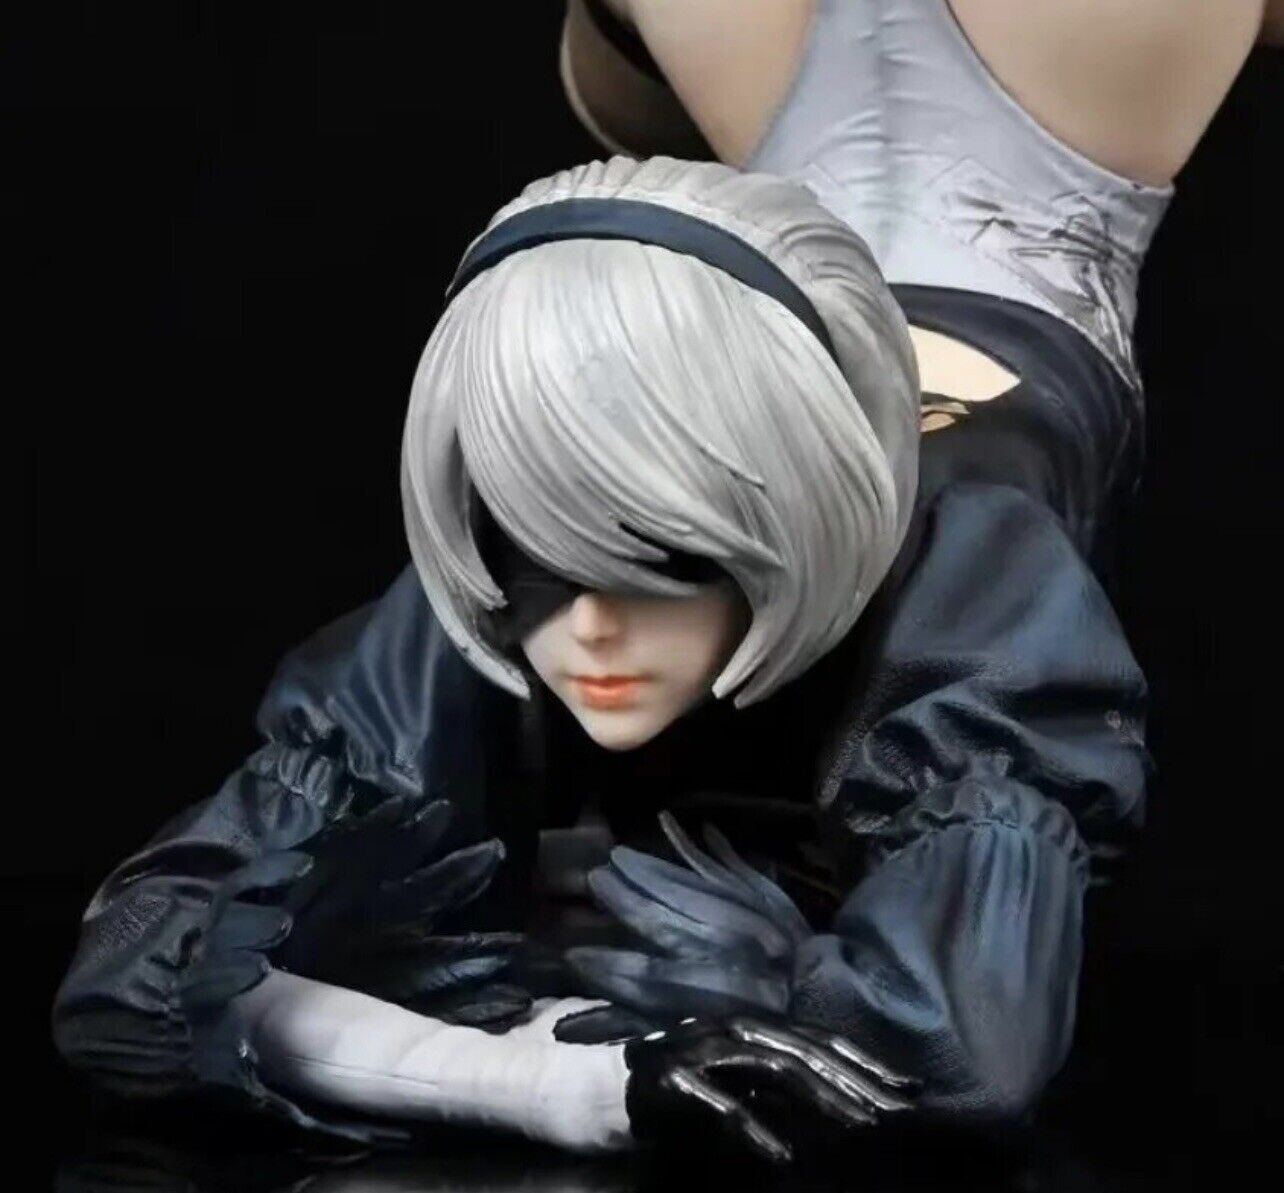 NieR Automata YoRHa No.2 Type Anime Sexy Adult Gril GK Figure Statue NEW 14 inch